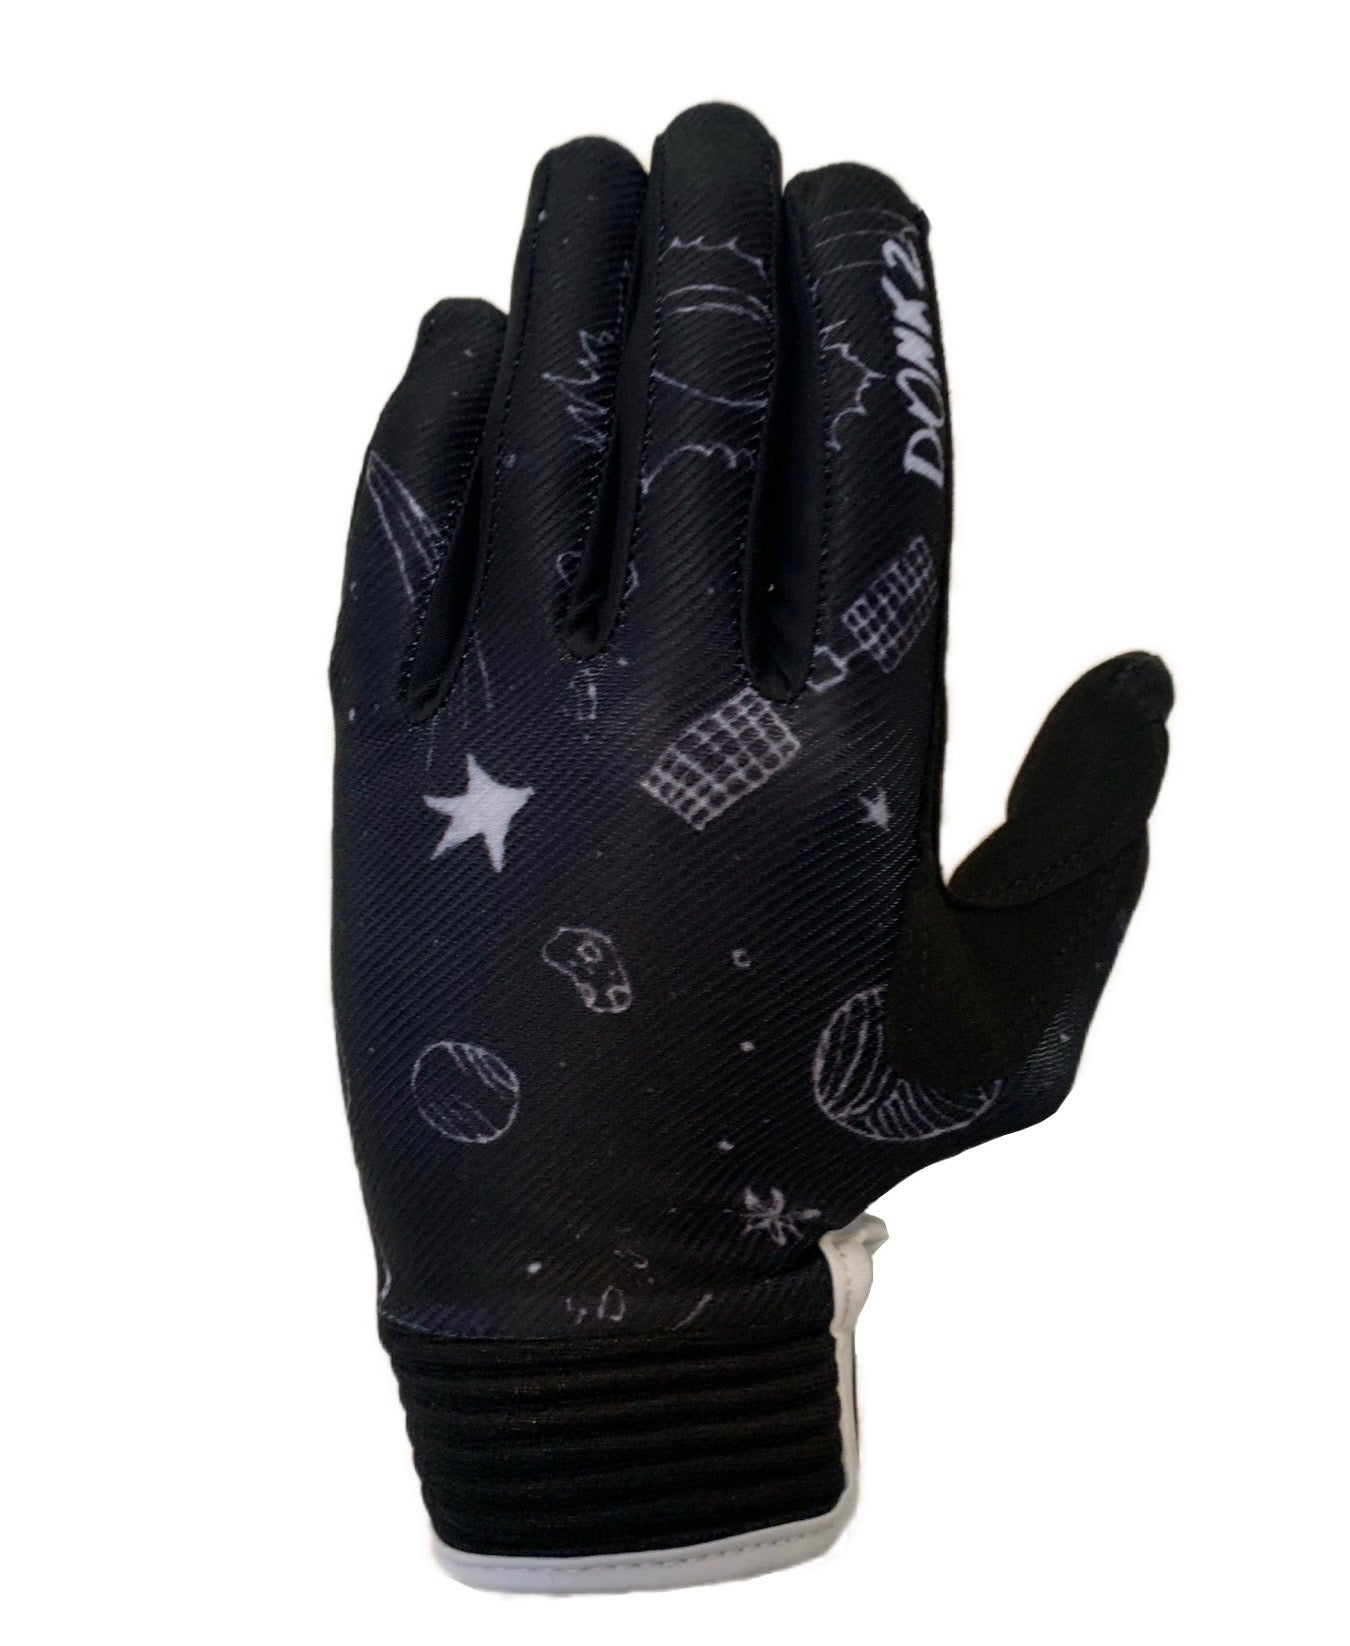 Donkz MX black gloves with space design